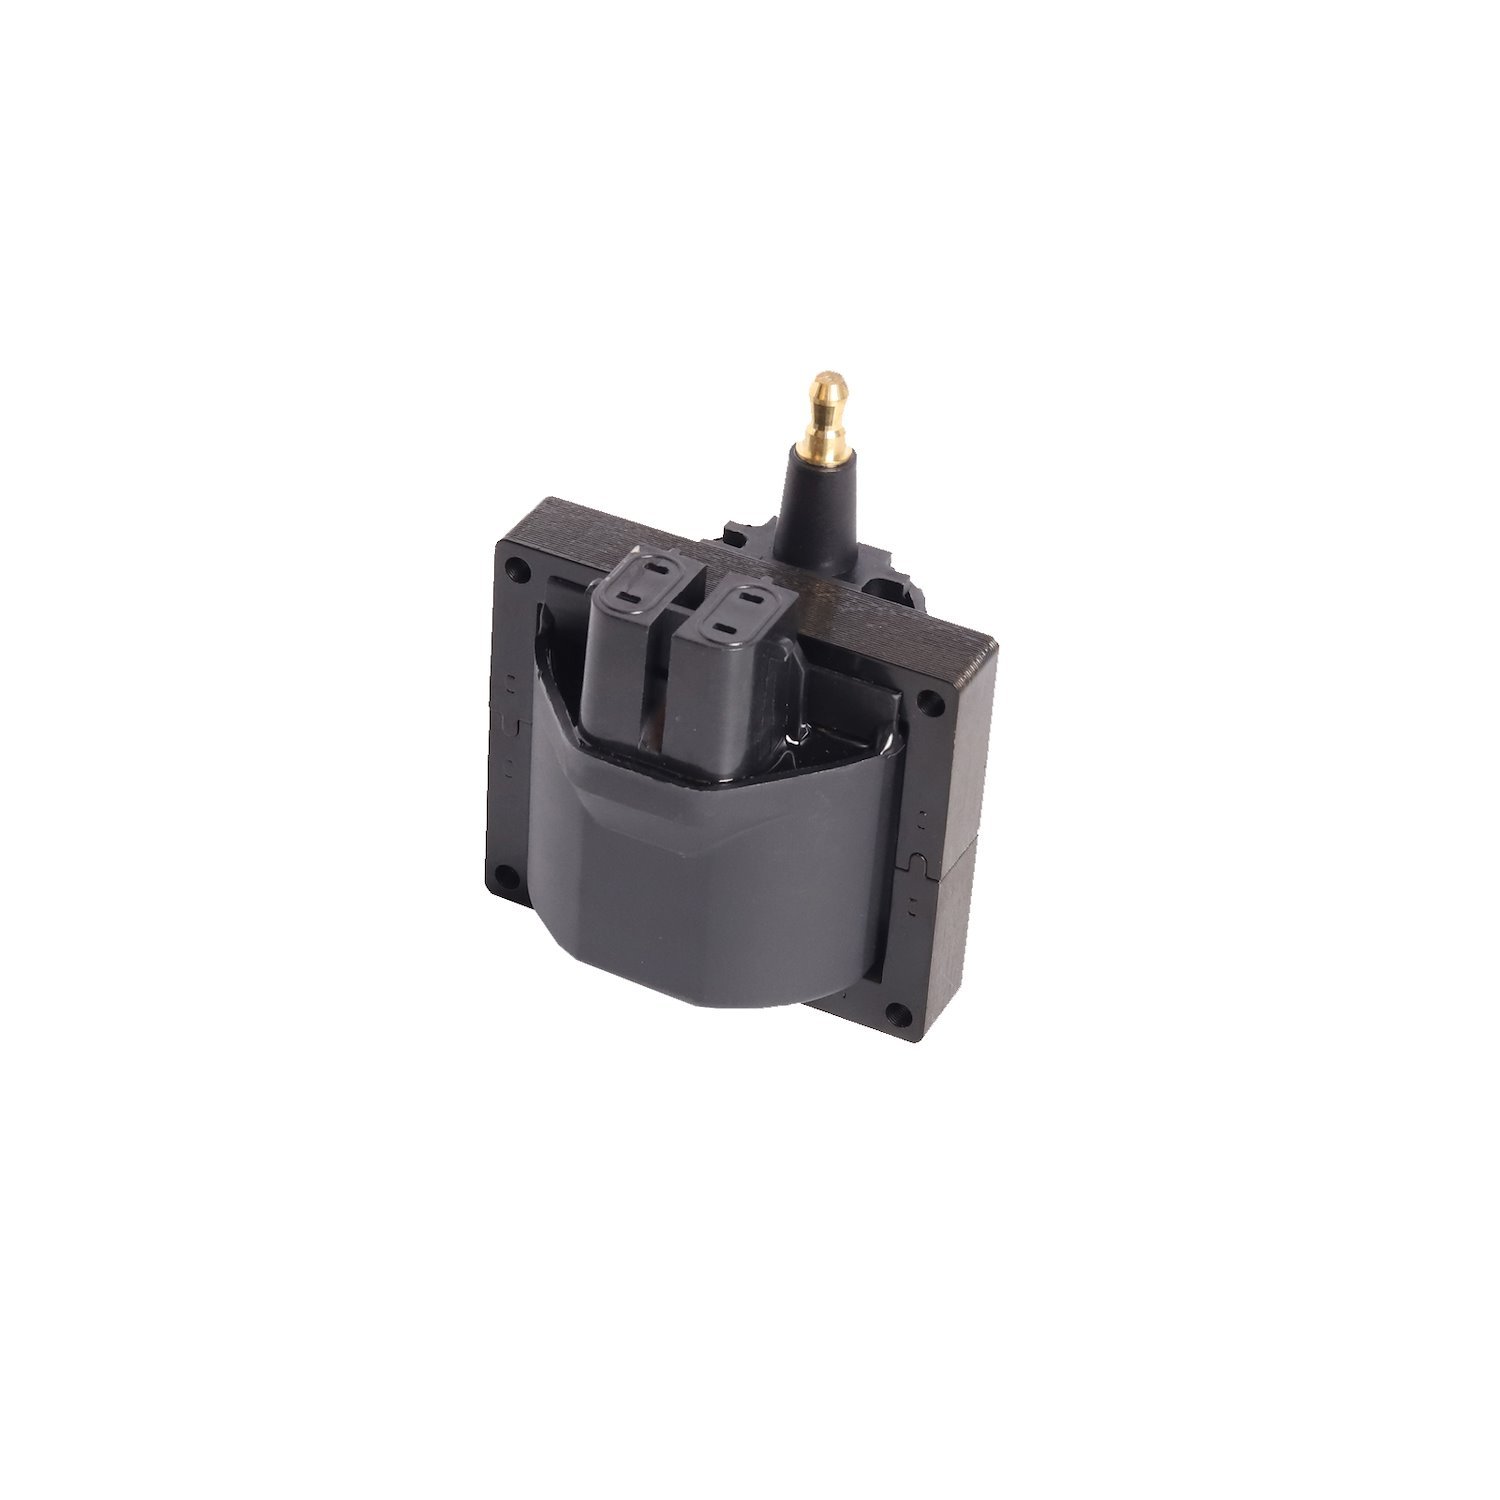 OE Replacement Ignition Coil for 1994-1995 Chevrolet Blazer GMC Jimmy 4.3L V6